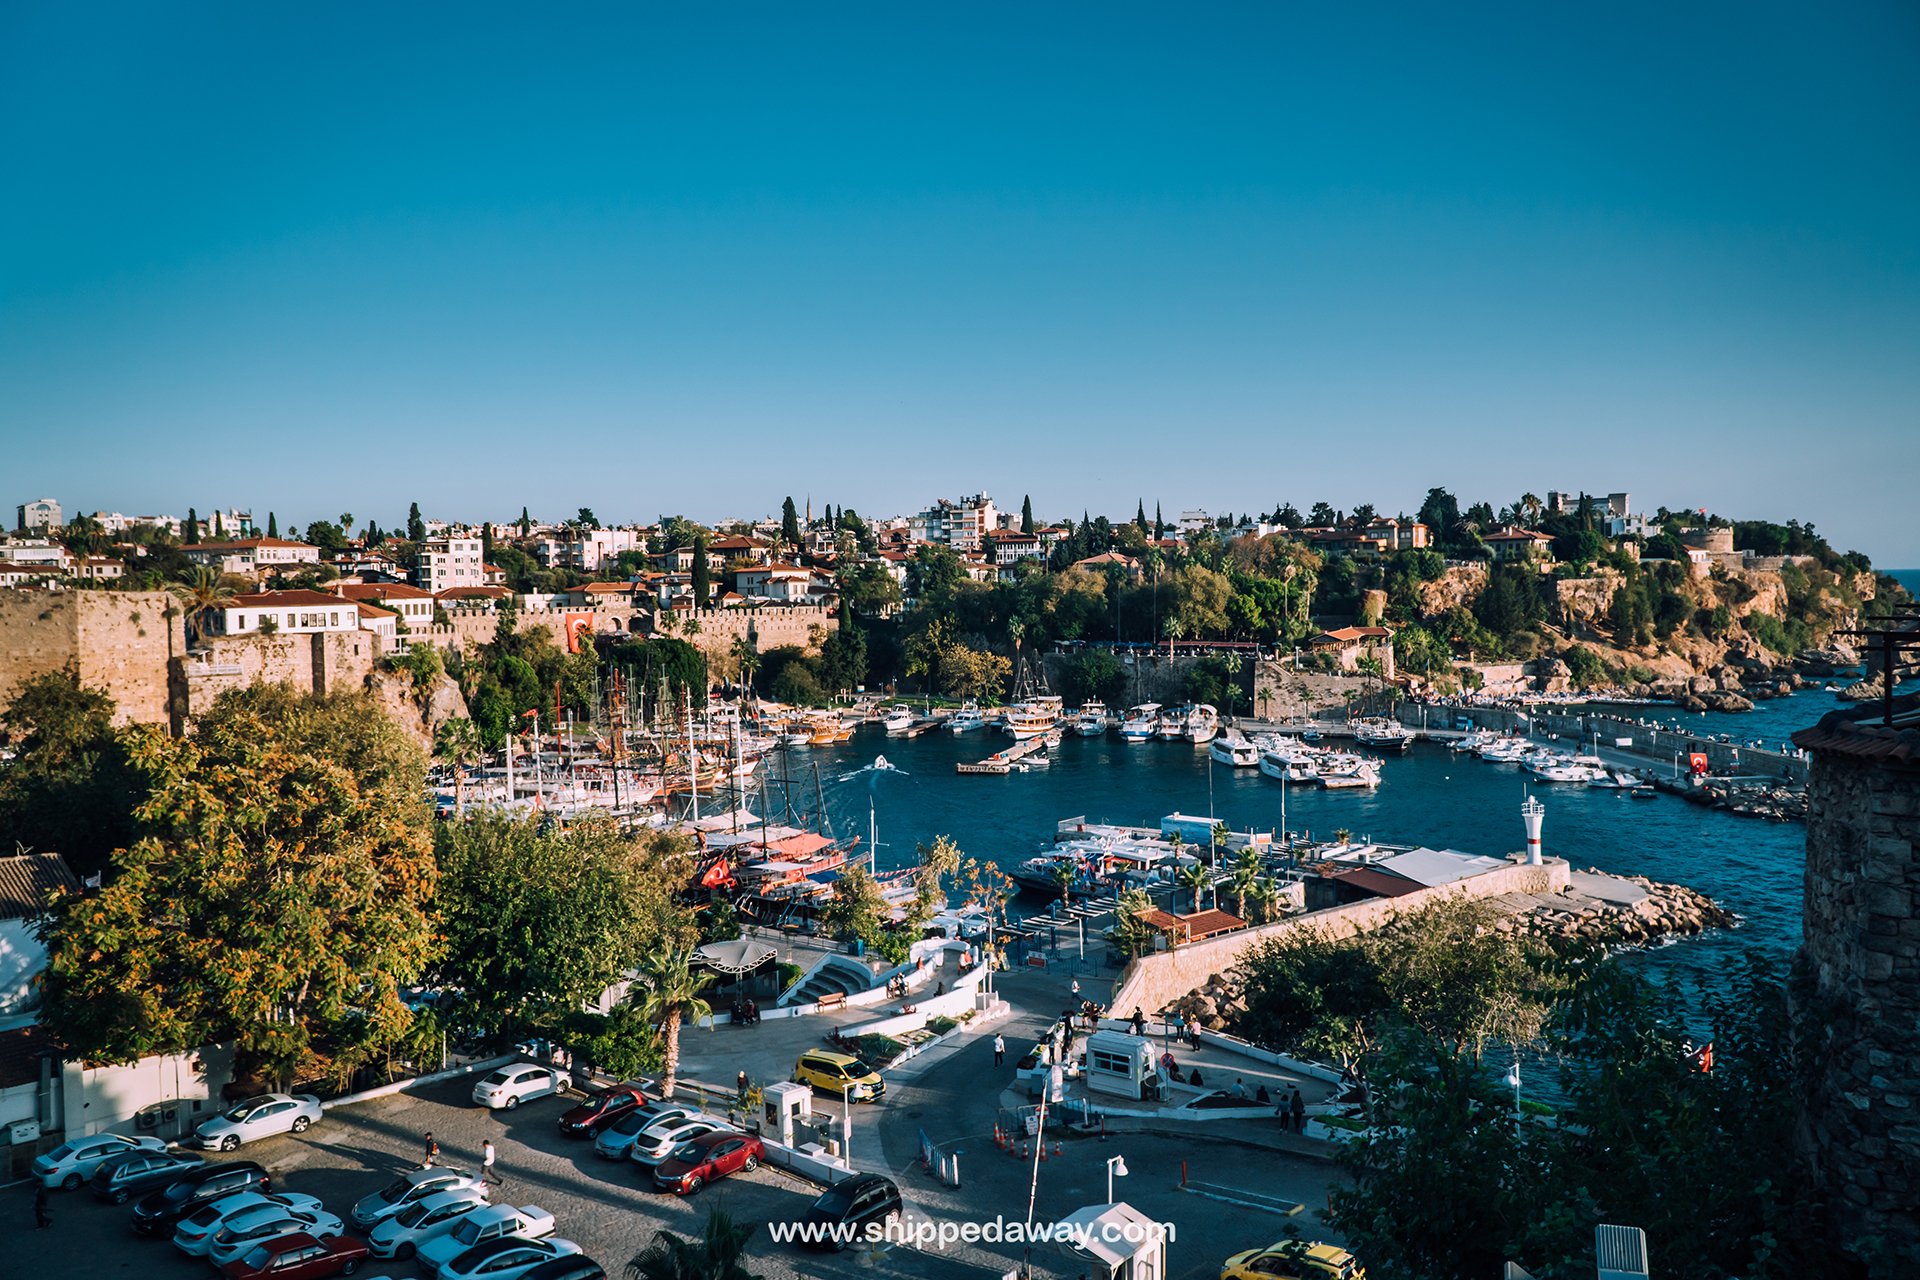 Top things to do in Antalya - Old Harbor, Marina view